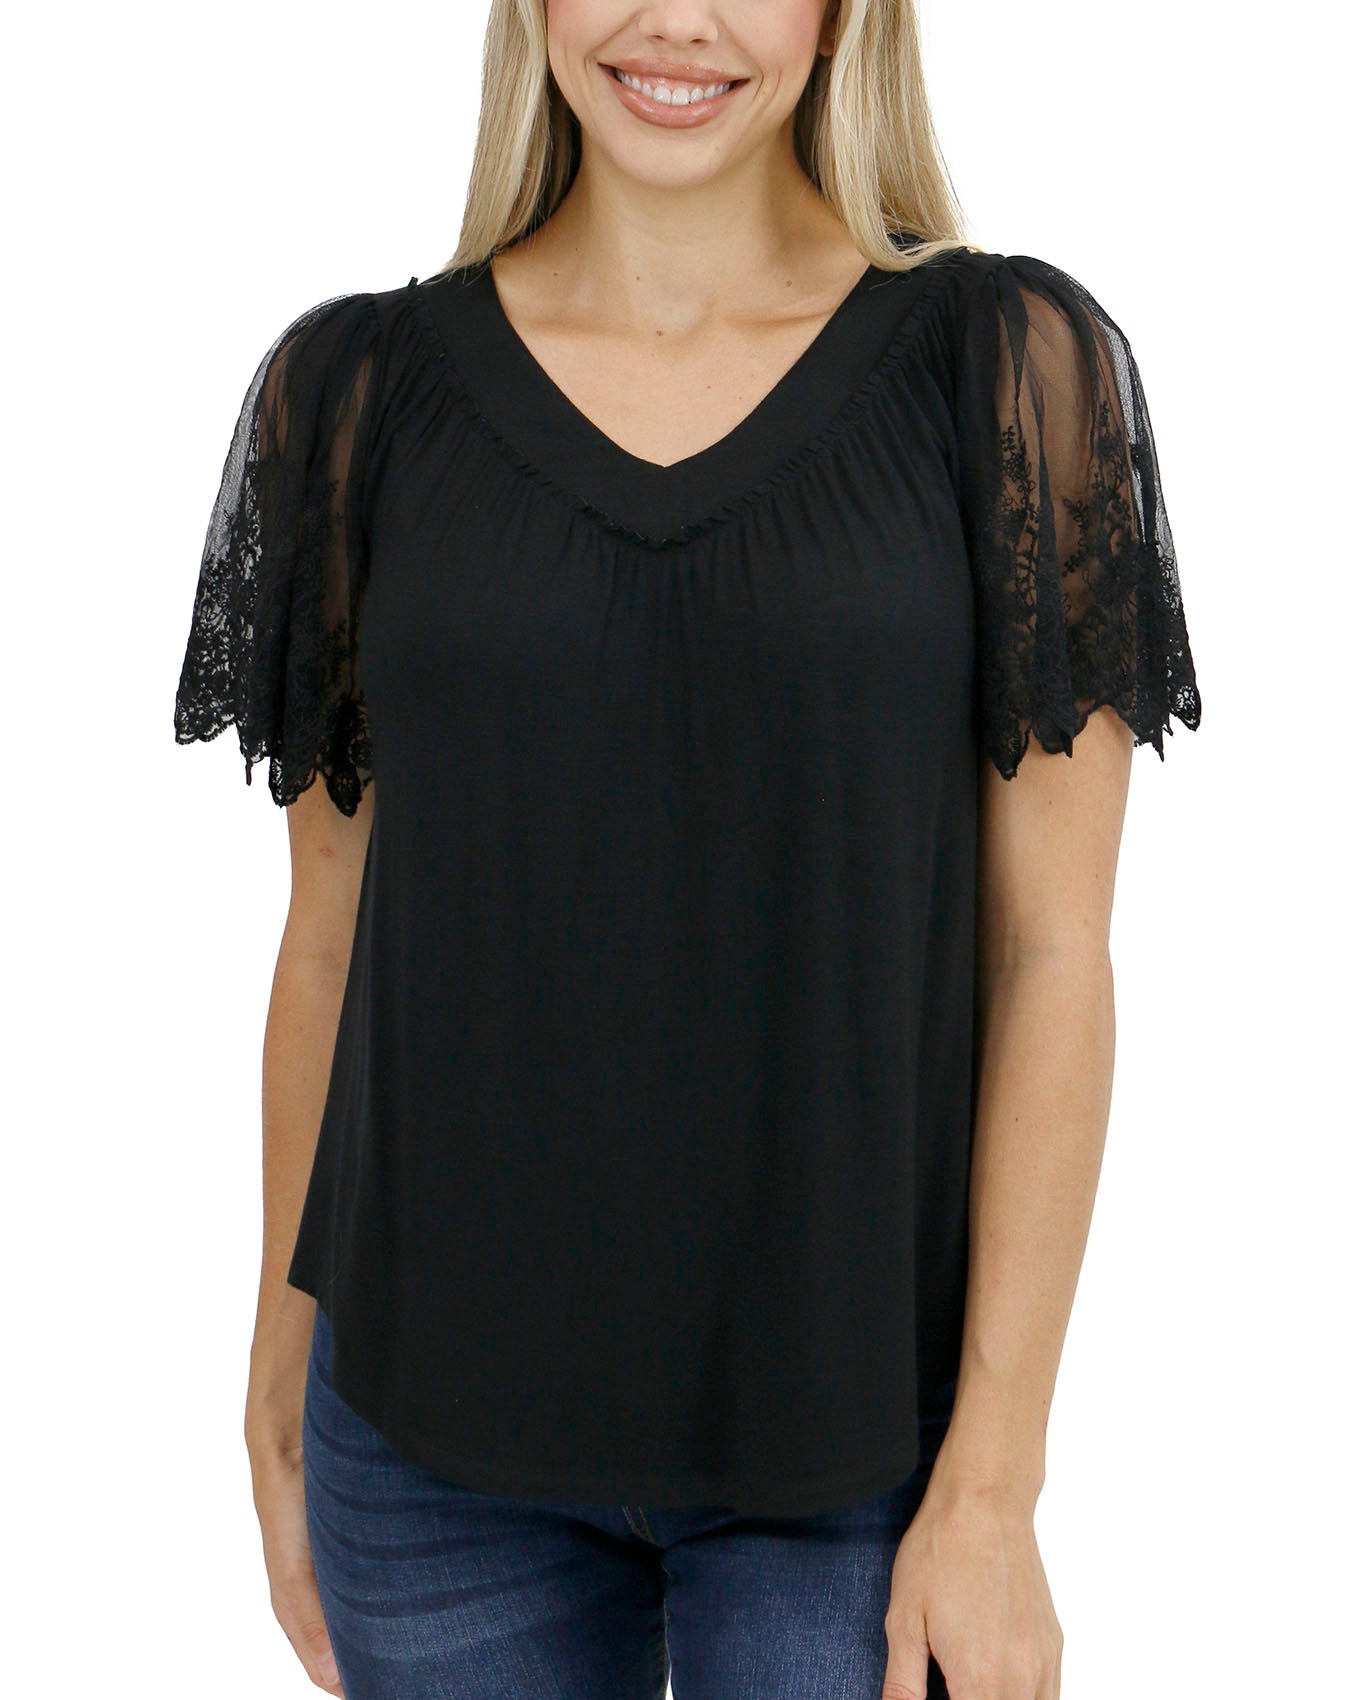 Sable Black Lace Sleeve Top - Grace and Lace